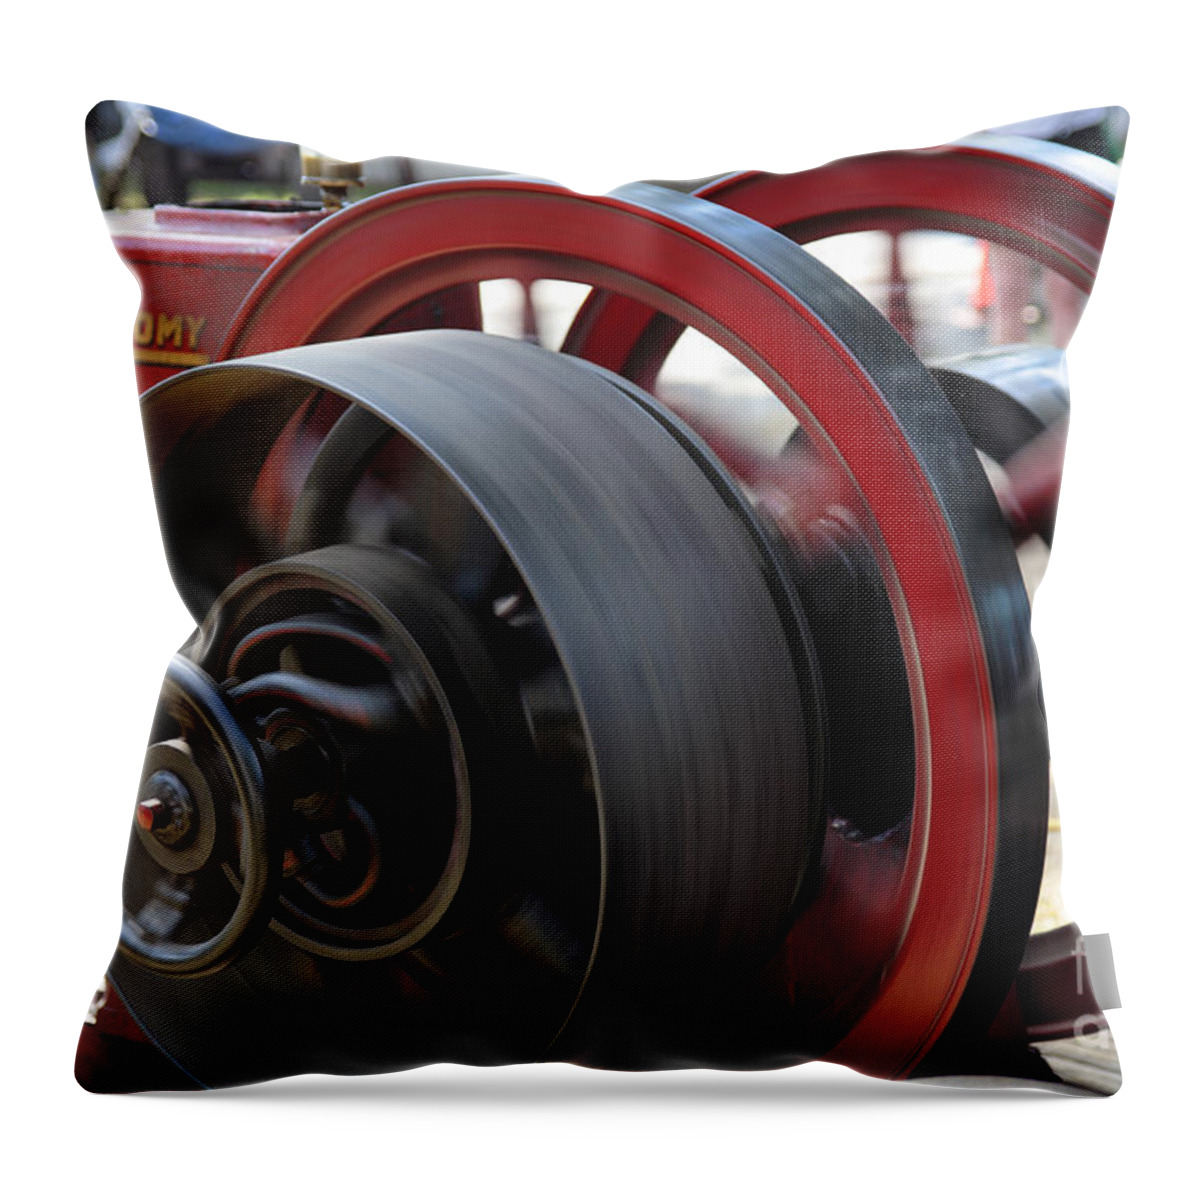 County Fair Throw Pillow featuring the photograph Old Economy Gas Engine on Display at a County Fair by William Kuta